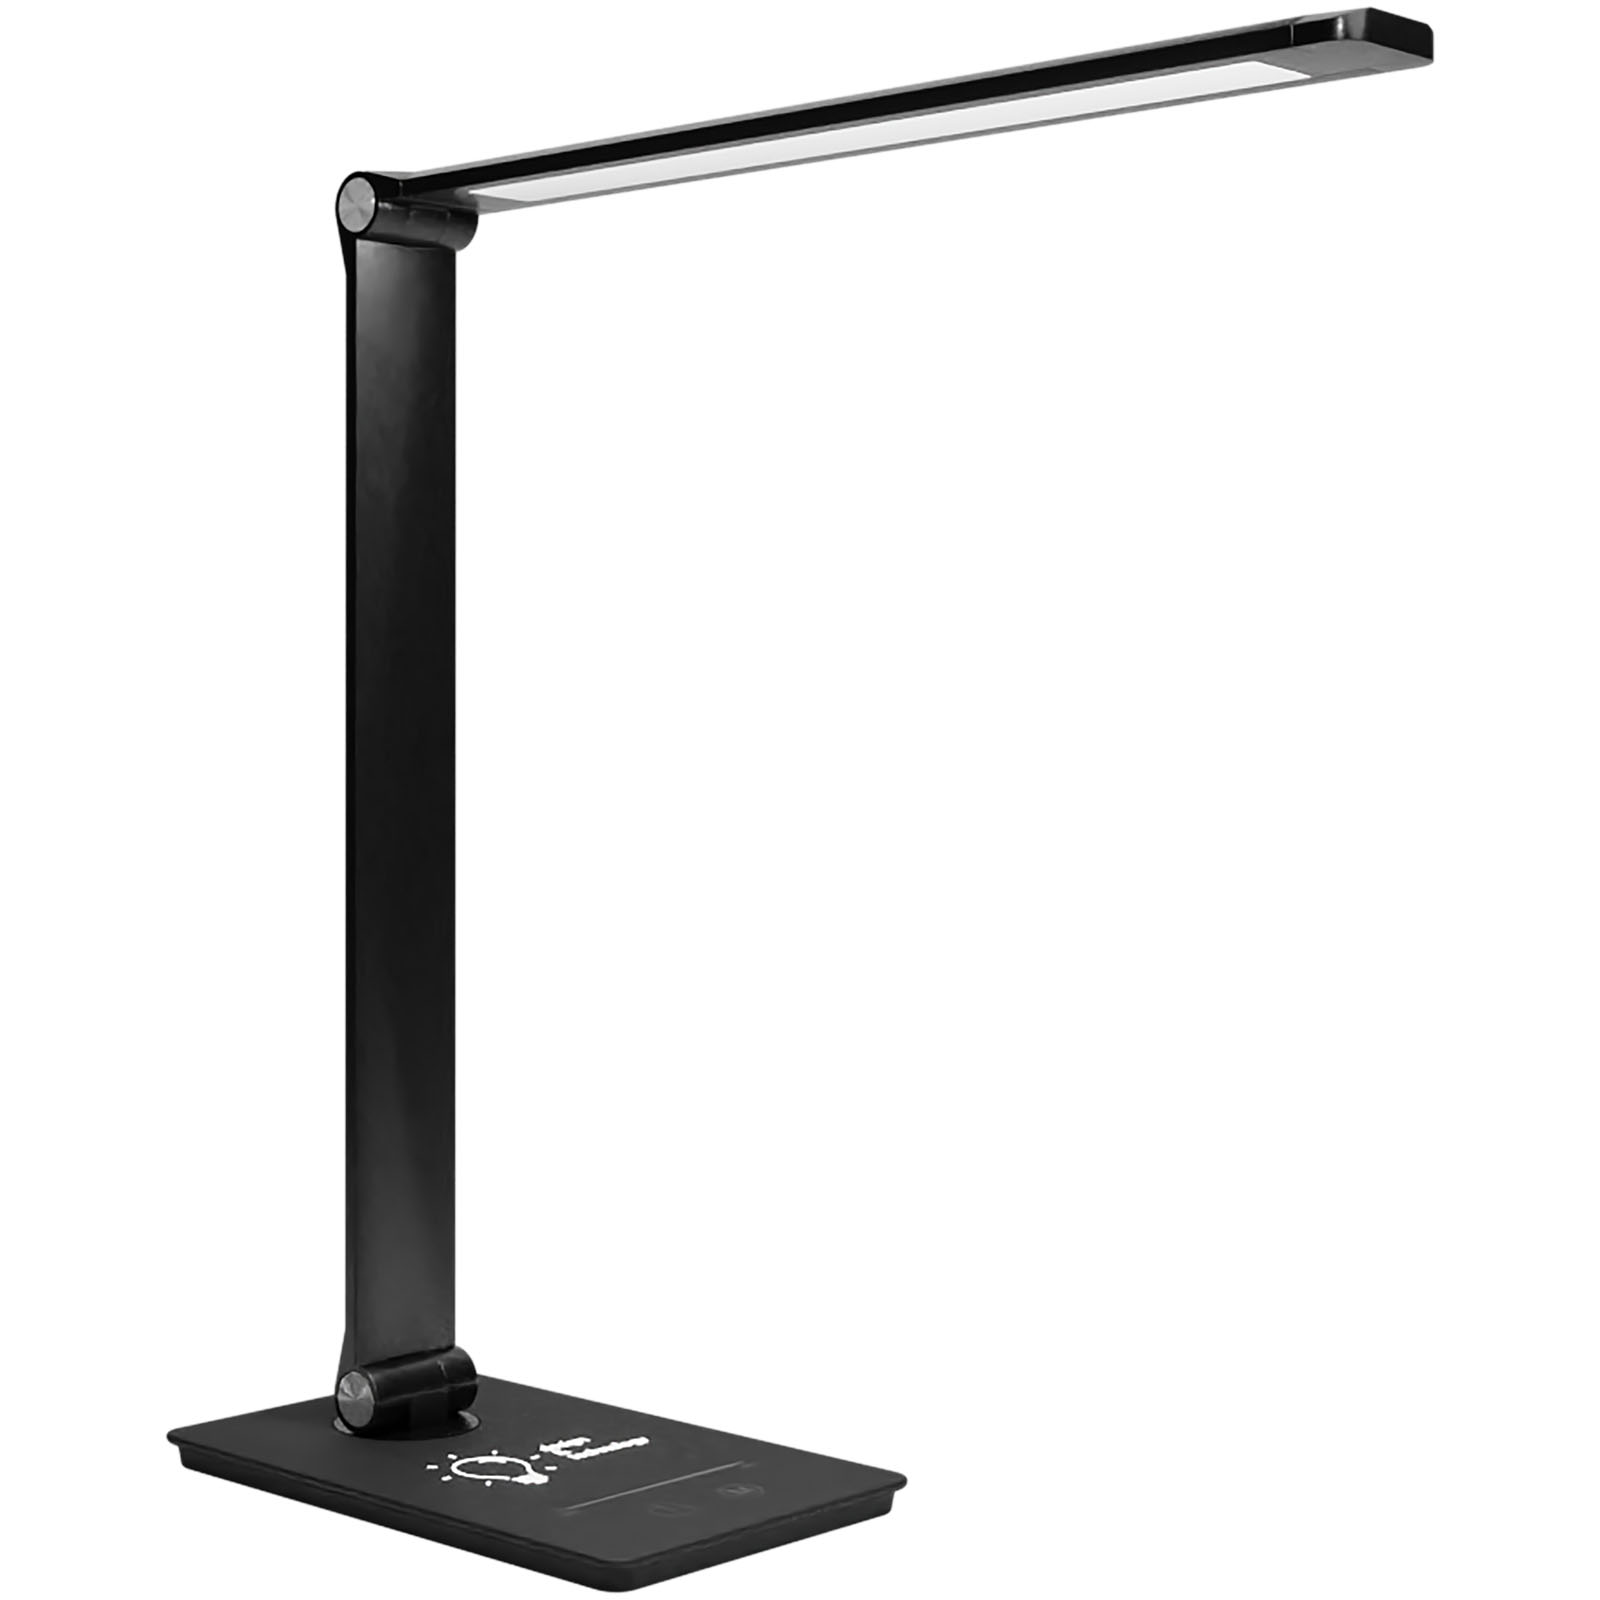 A desk lamp that supports wireless charging and features a logo that lights up - Botley